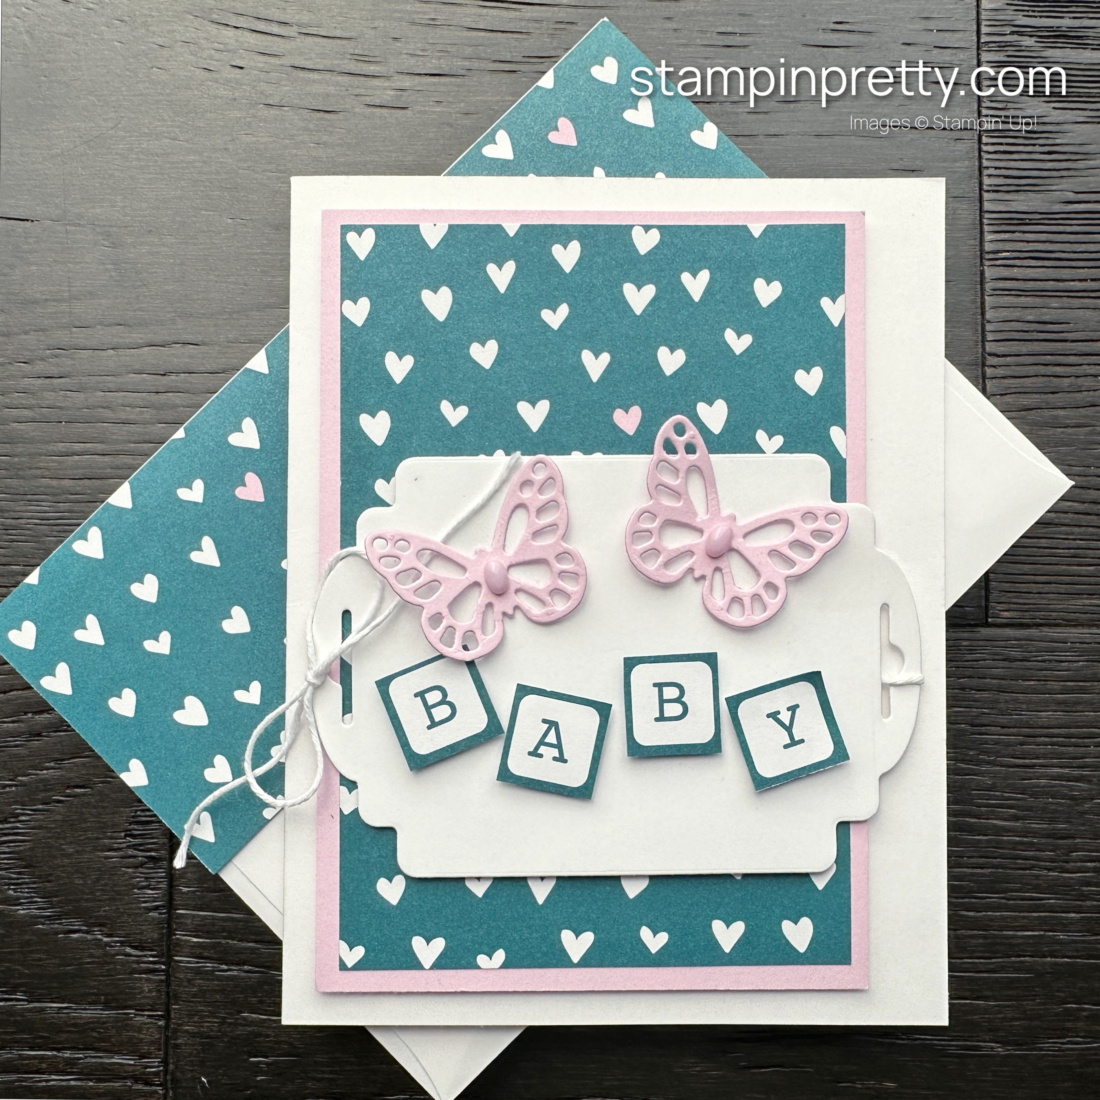 Create a cute baby card using the Delightfully Eclectic Designer Series Paper and Designer Tags Dies by Stampin' up! Mary Fish, Stampin' Pretty